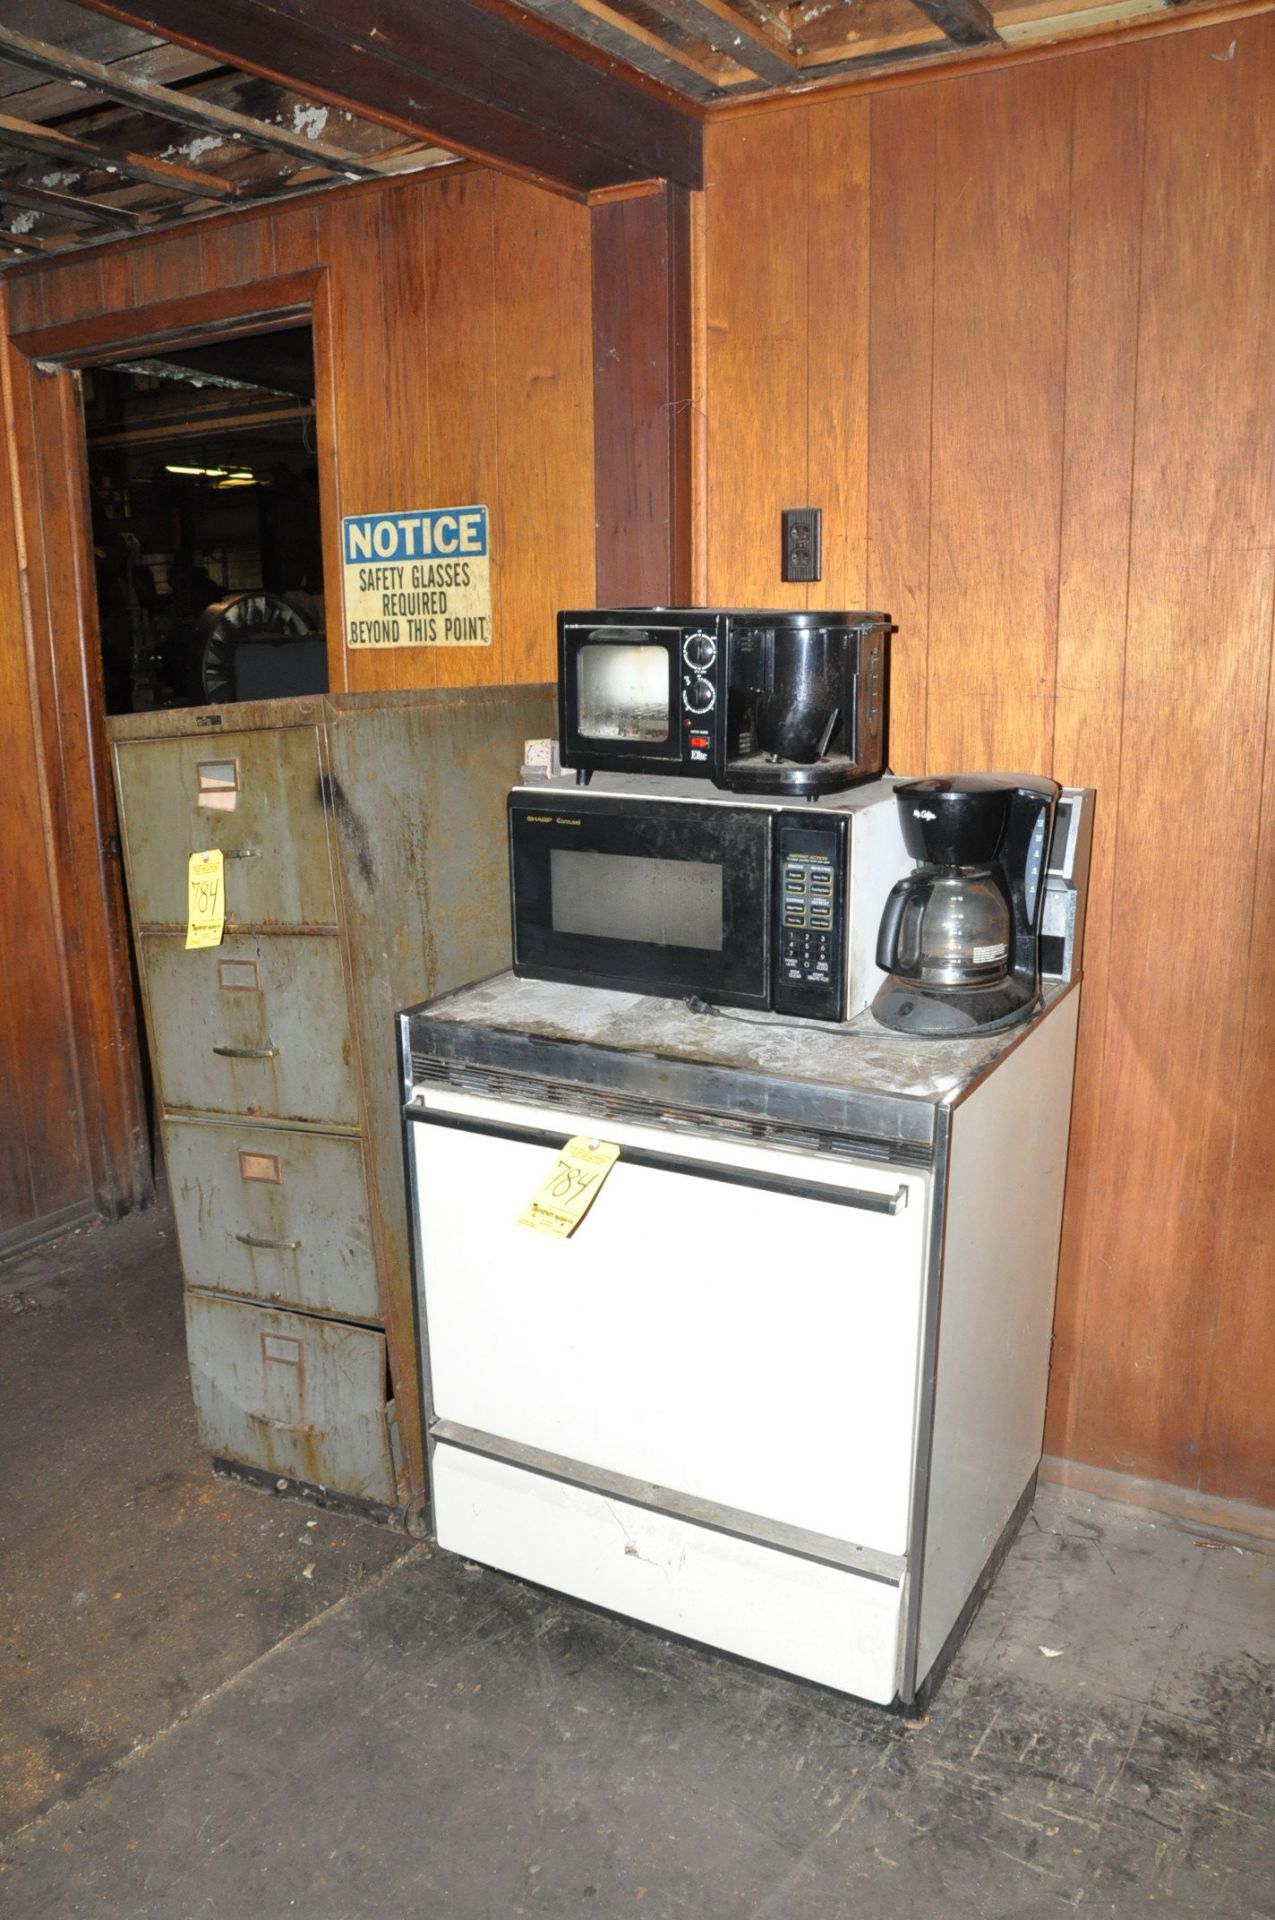 Lot-(2) Wood Benches, Wood Table, (2) File Cabinets, Wood Organizer, Stools, Oven, Microwave and (2) - Image 3 of 4